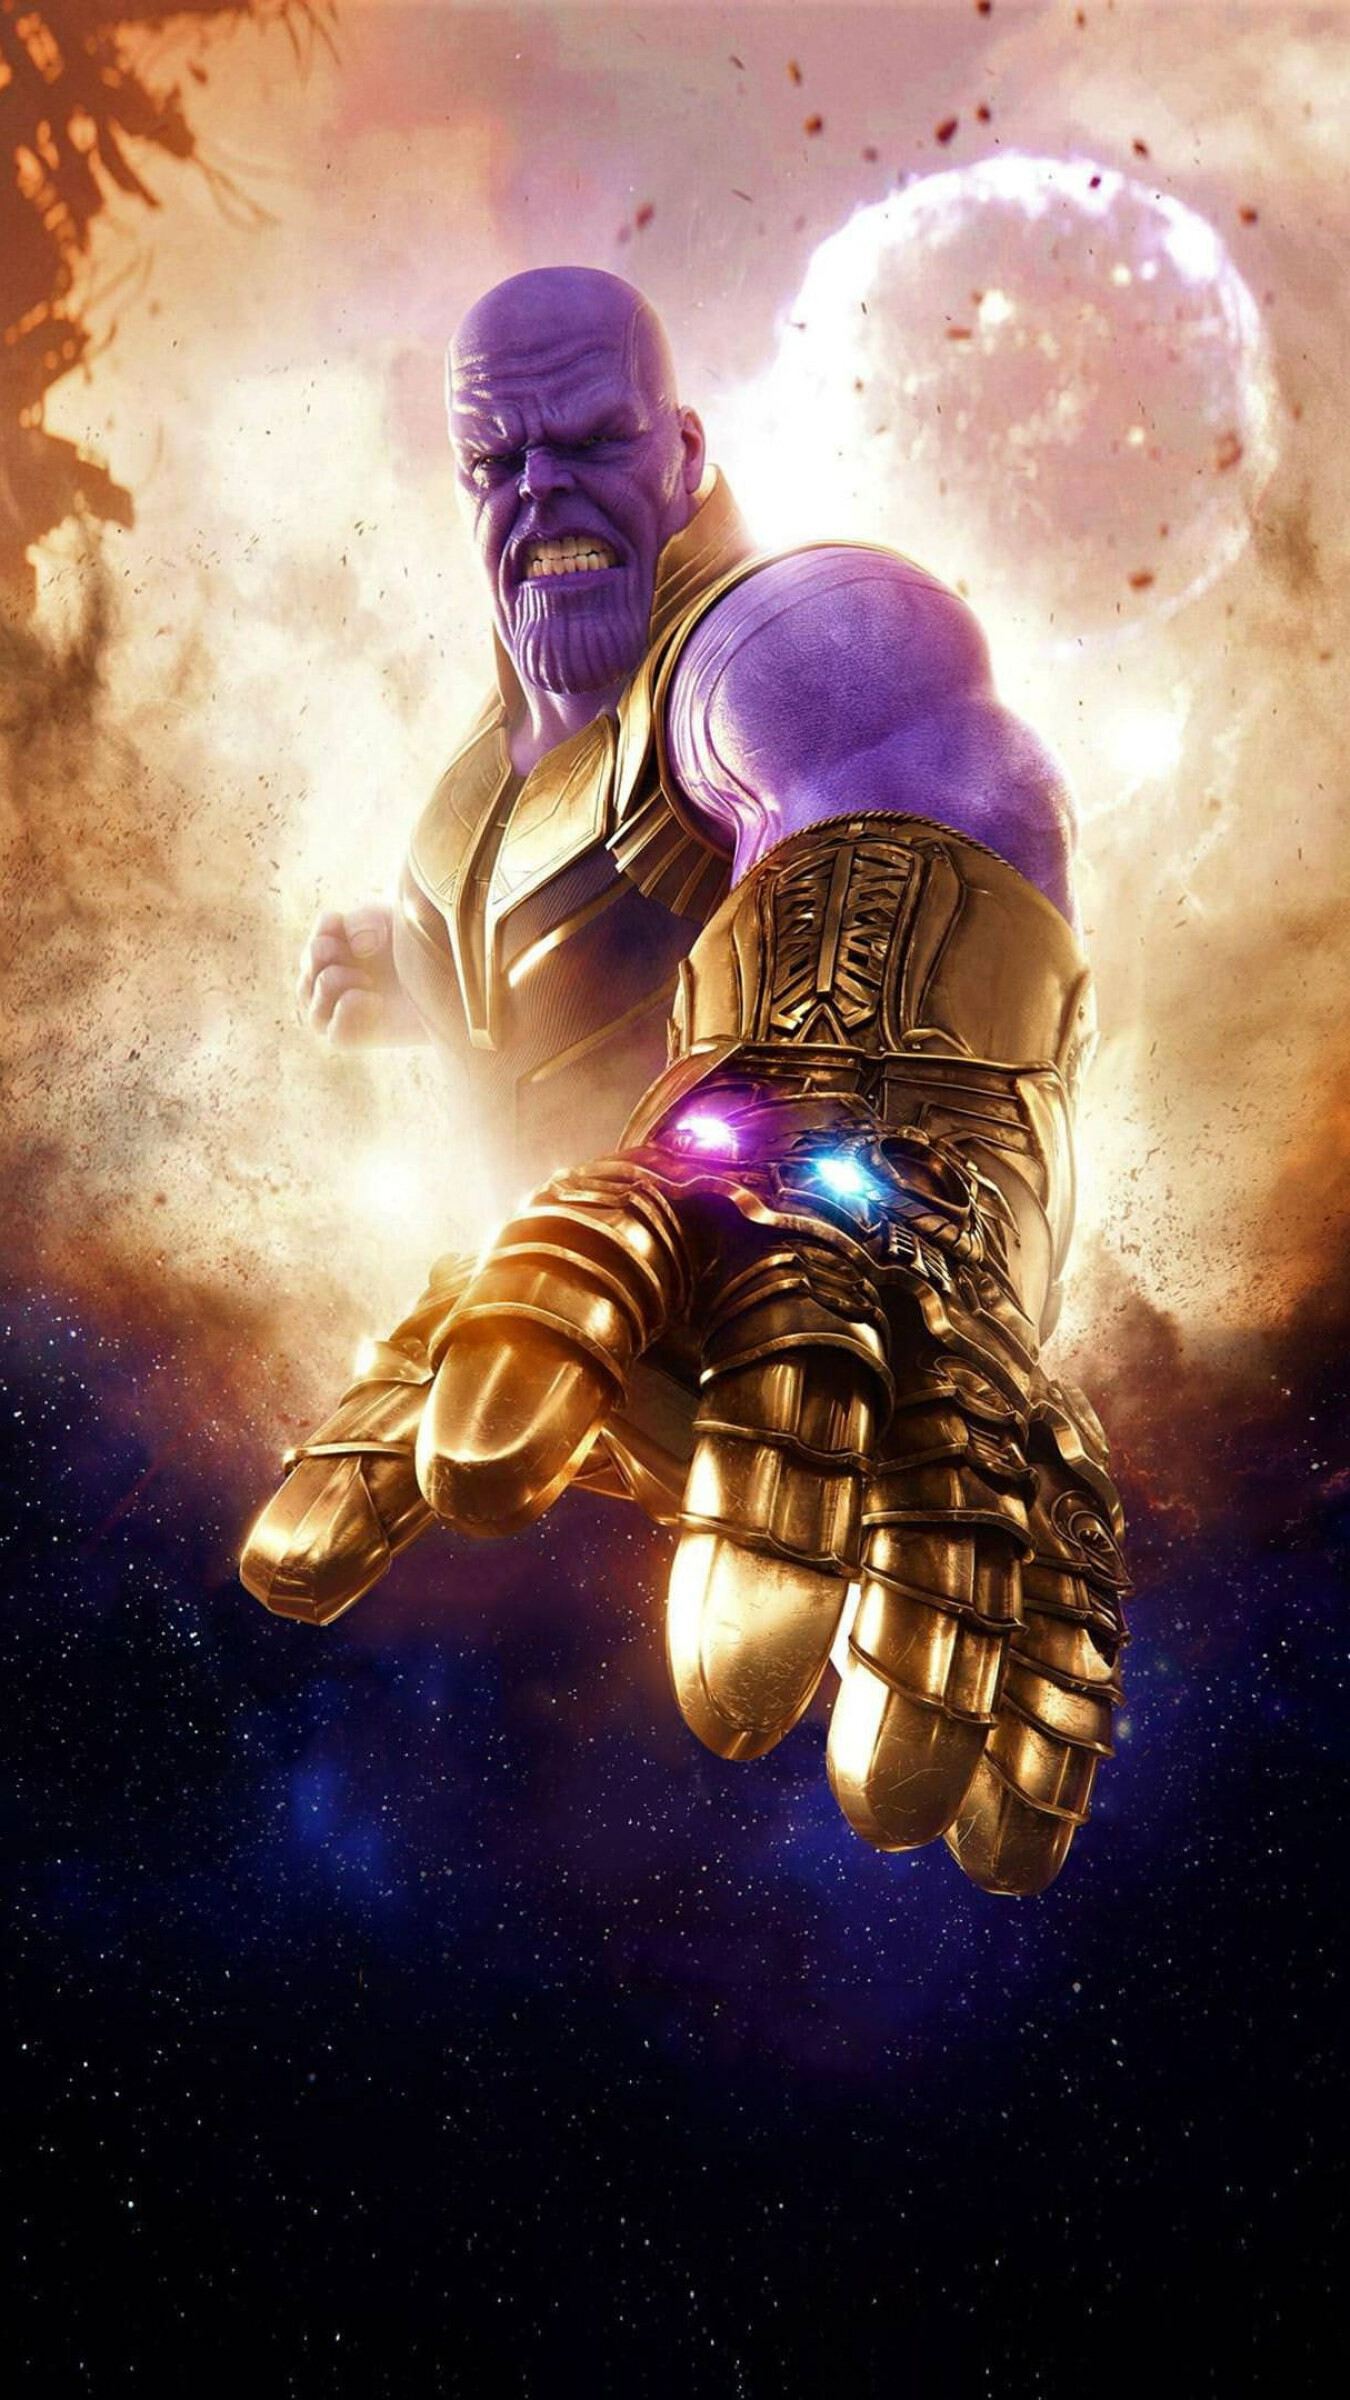 Avengers: Infinity War, Thanos, A Supervillain Appearing in American Comic Books. 1350x2400 HD Wallpaper.